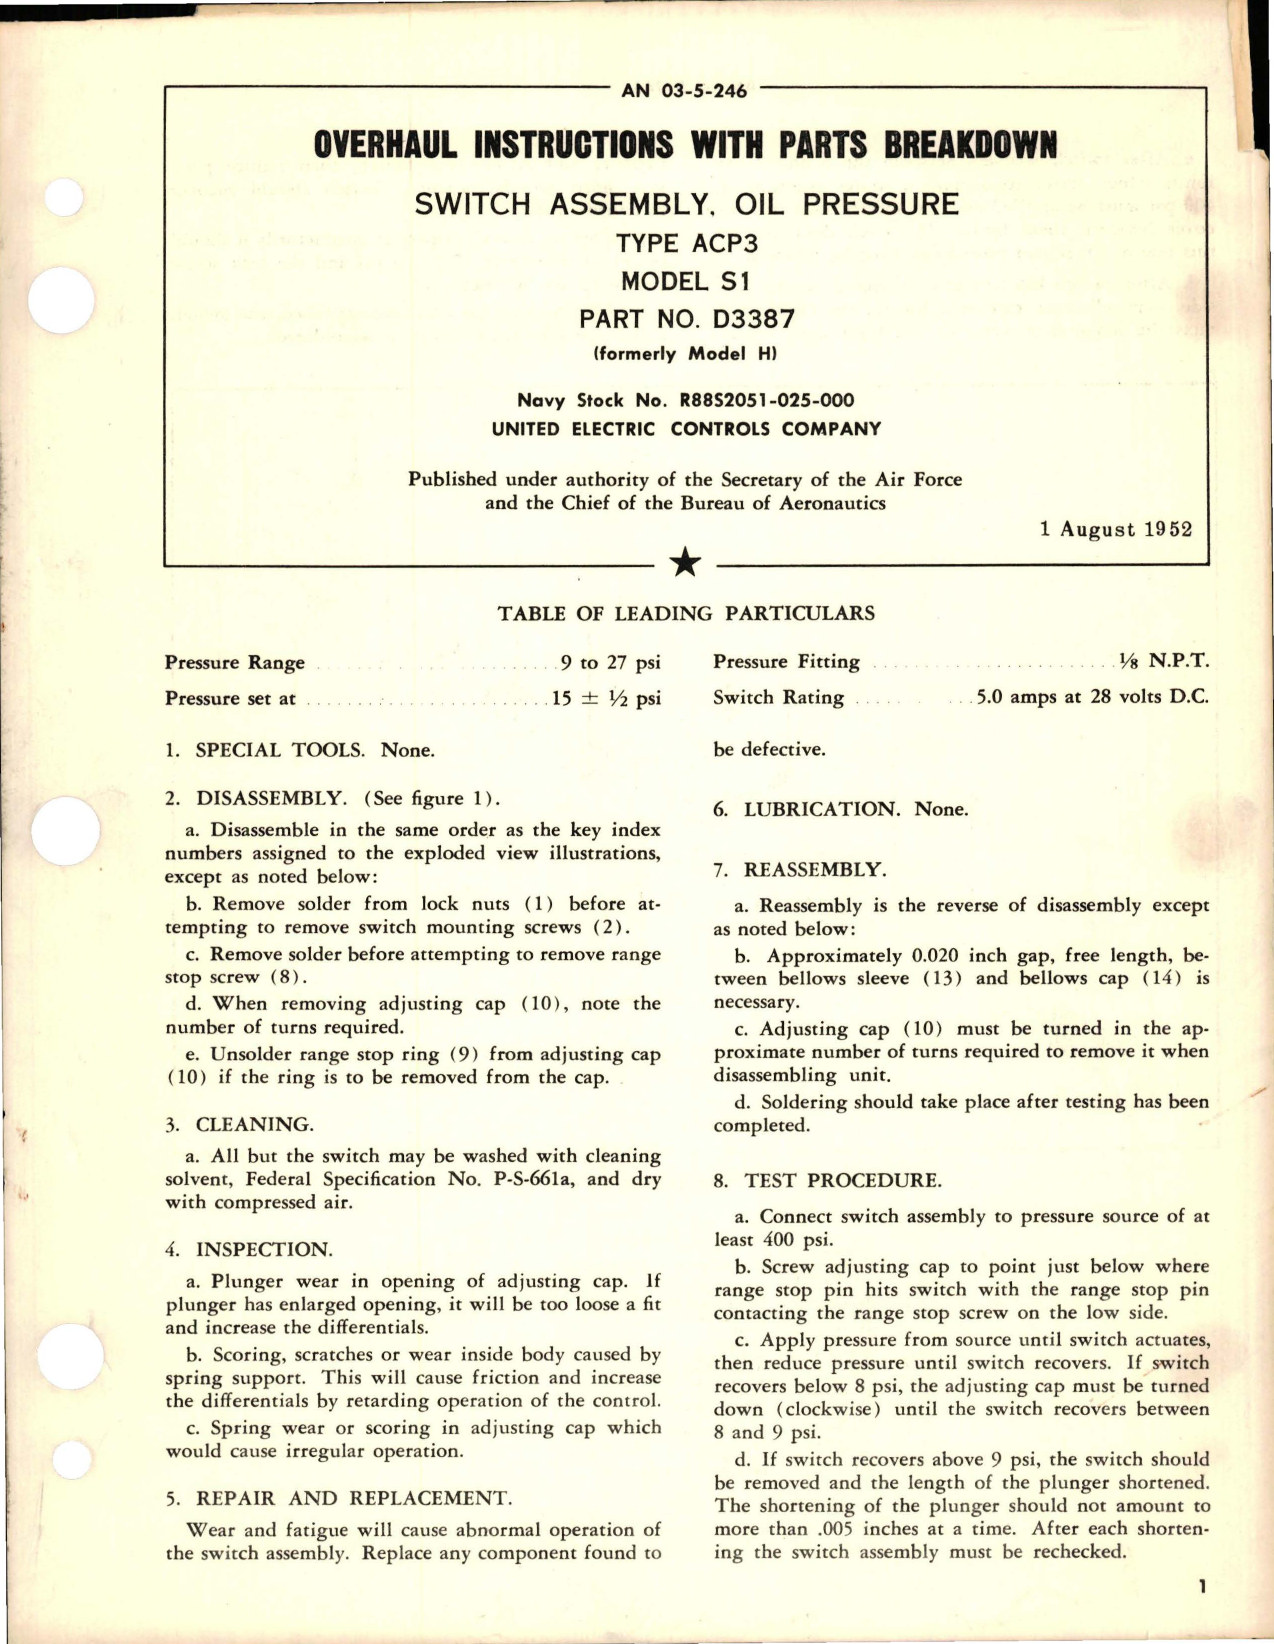 Sample page 1 from AirCorps Library document: Overhaul Instructions with Parts Breakdown for Oil Pressure Switch Assembly - Type ACP3 - Model S1 - Part D3387 